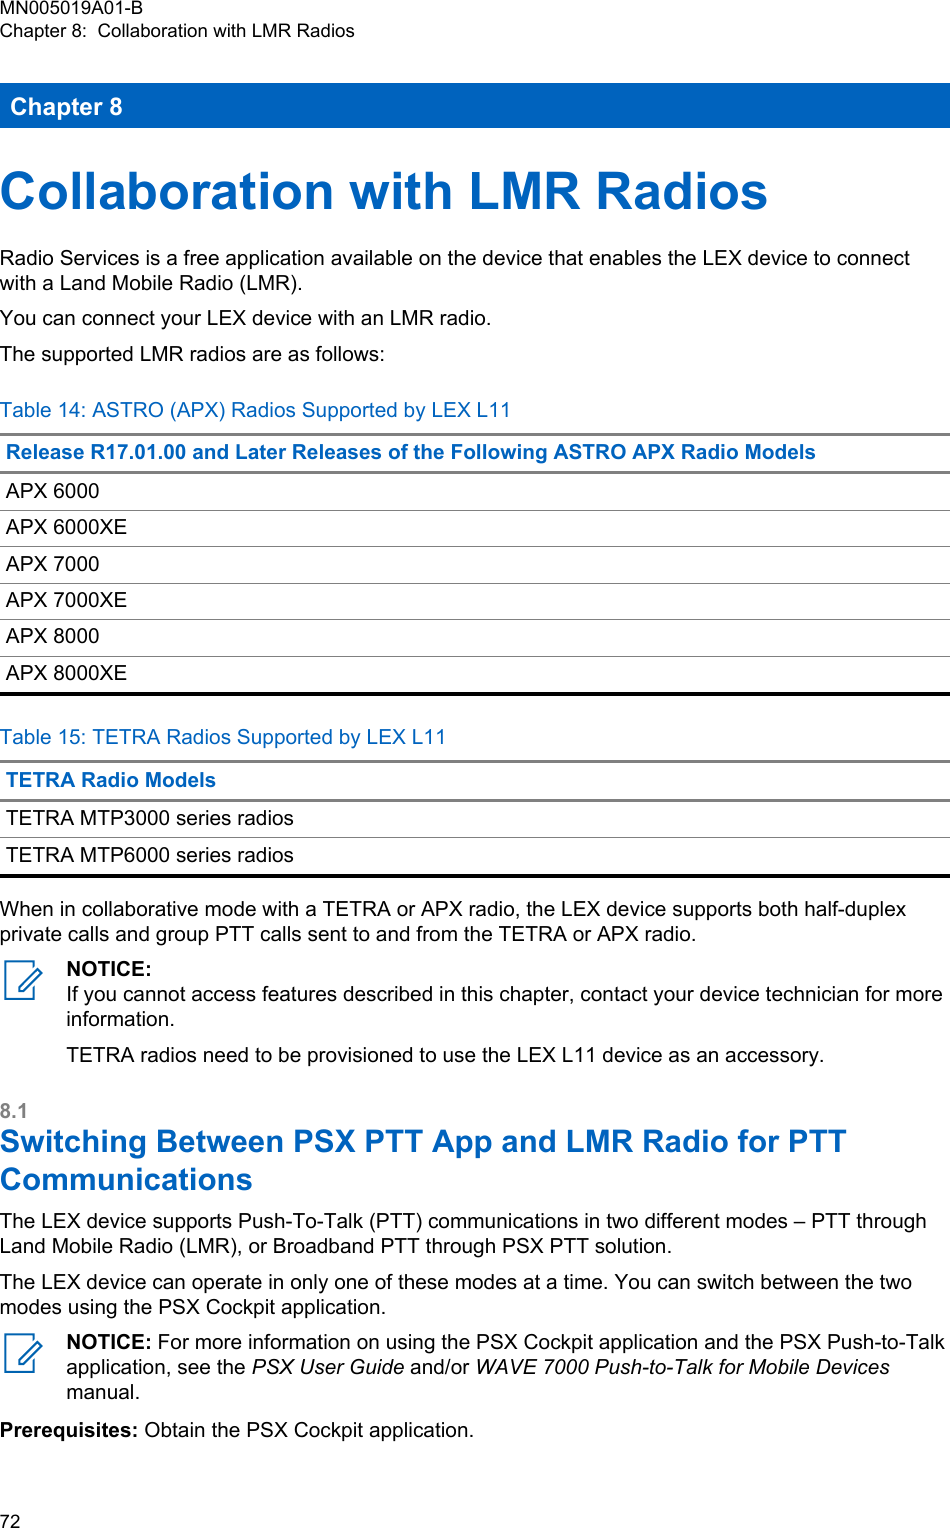 Chapter 8Collaboration with LMR RadiosRadio Services is a free application available on the device that enables the LEX device to connectwith a Land Mobile Radio (LMR).You can connect your LEX device with an LMR radio.The supported LMR radios are as follows:Table 14: ASTRO (APX) Radios Supported by LEX L11Release R17.01.00 and Later Releases of the Following ASTRO APX Radio ModelsAPX 6000APX 6000XEAPX 7000APX 7000XEAPX 8000APX 8000XETable 15: TETRA Radios Supported by LEX L11TETRA Radio ModelsTETRA MTP3000 series radiosTETRA MTP6000 series radiosWhen in collaborative mode with a TETRA or APX radio, the LEX device supports both half-duplexprivate calls and group PTT calls sent to and from the TETRA or APX radio.NOTICE:If you cannot access features described in this chapter, contact your device technician for moreinformation.TETRA radios need to be provisioned to use the LEX L11 device as an accessory.8.1Switching Between PSX PTT App and LMR Radio for PTTCommunicationsThe LEX device supports Push-To-Talk (PTT) communications in two different modes – PTT throughLand Mobile Radio (LMR), or Broadband PTT through PSX PTT solution.The LEX device can operate in only one of these modes at a time. You can switch between the twomodes using the PSX Cockpit application.NOTICE: For more information on using the PSX Cockpit application and the PSX Push-to-Talkapplication, see the PSX User Guide and/or WAVE 7000 Push-to-Talk for Mobile Devicesmanual.Prerequisites: Obtain the PSX Cockpit application.MN005019A01-BChapter 8:  Collaboration with LMR Radios72  